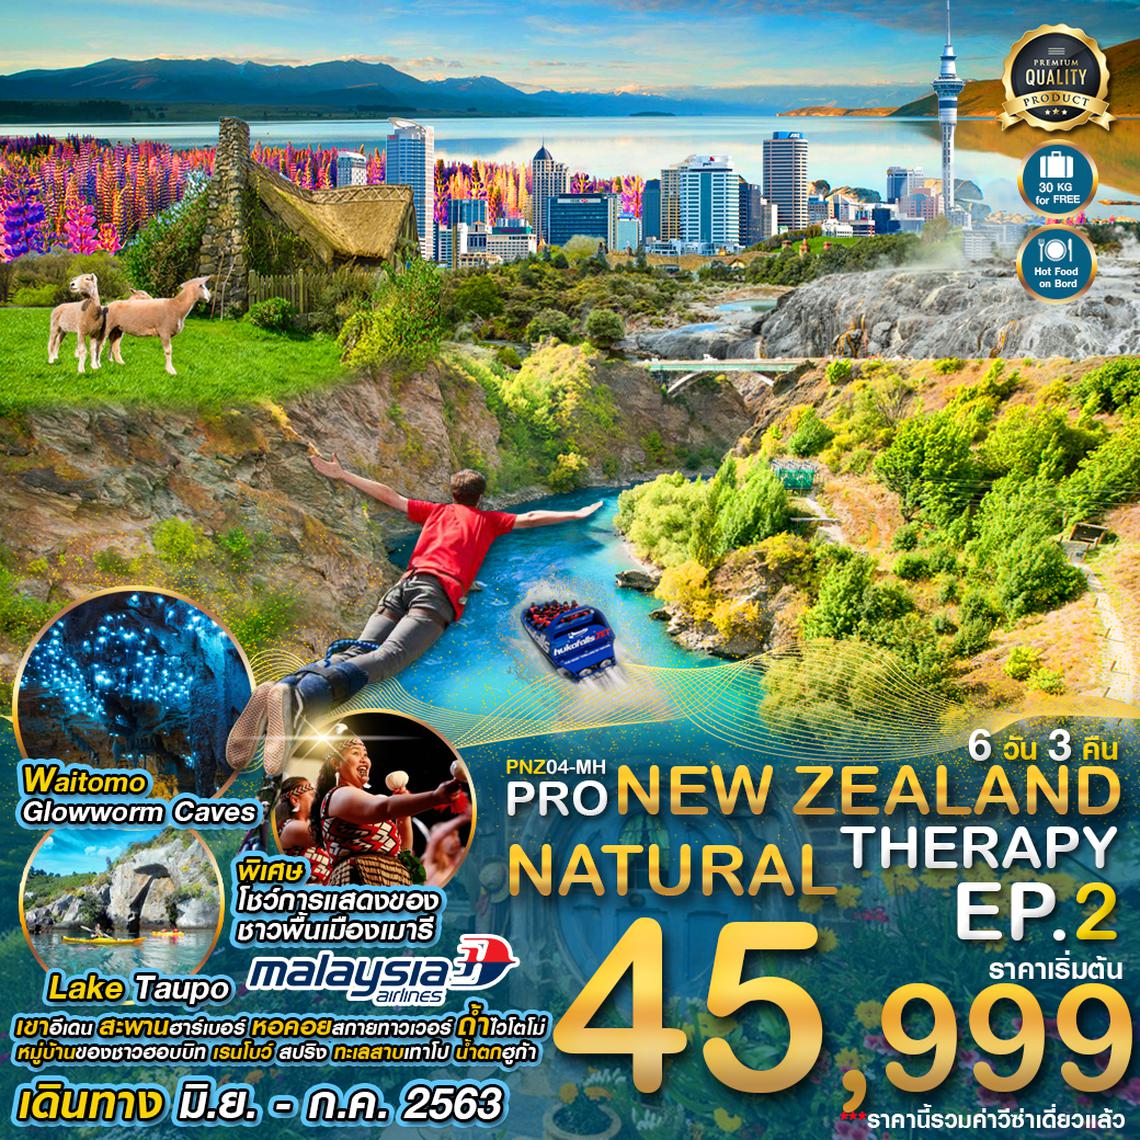 PNZ04-MH PRO NEW ZEALAND NATURAL THERAPHY EP.2 6D3N